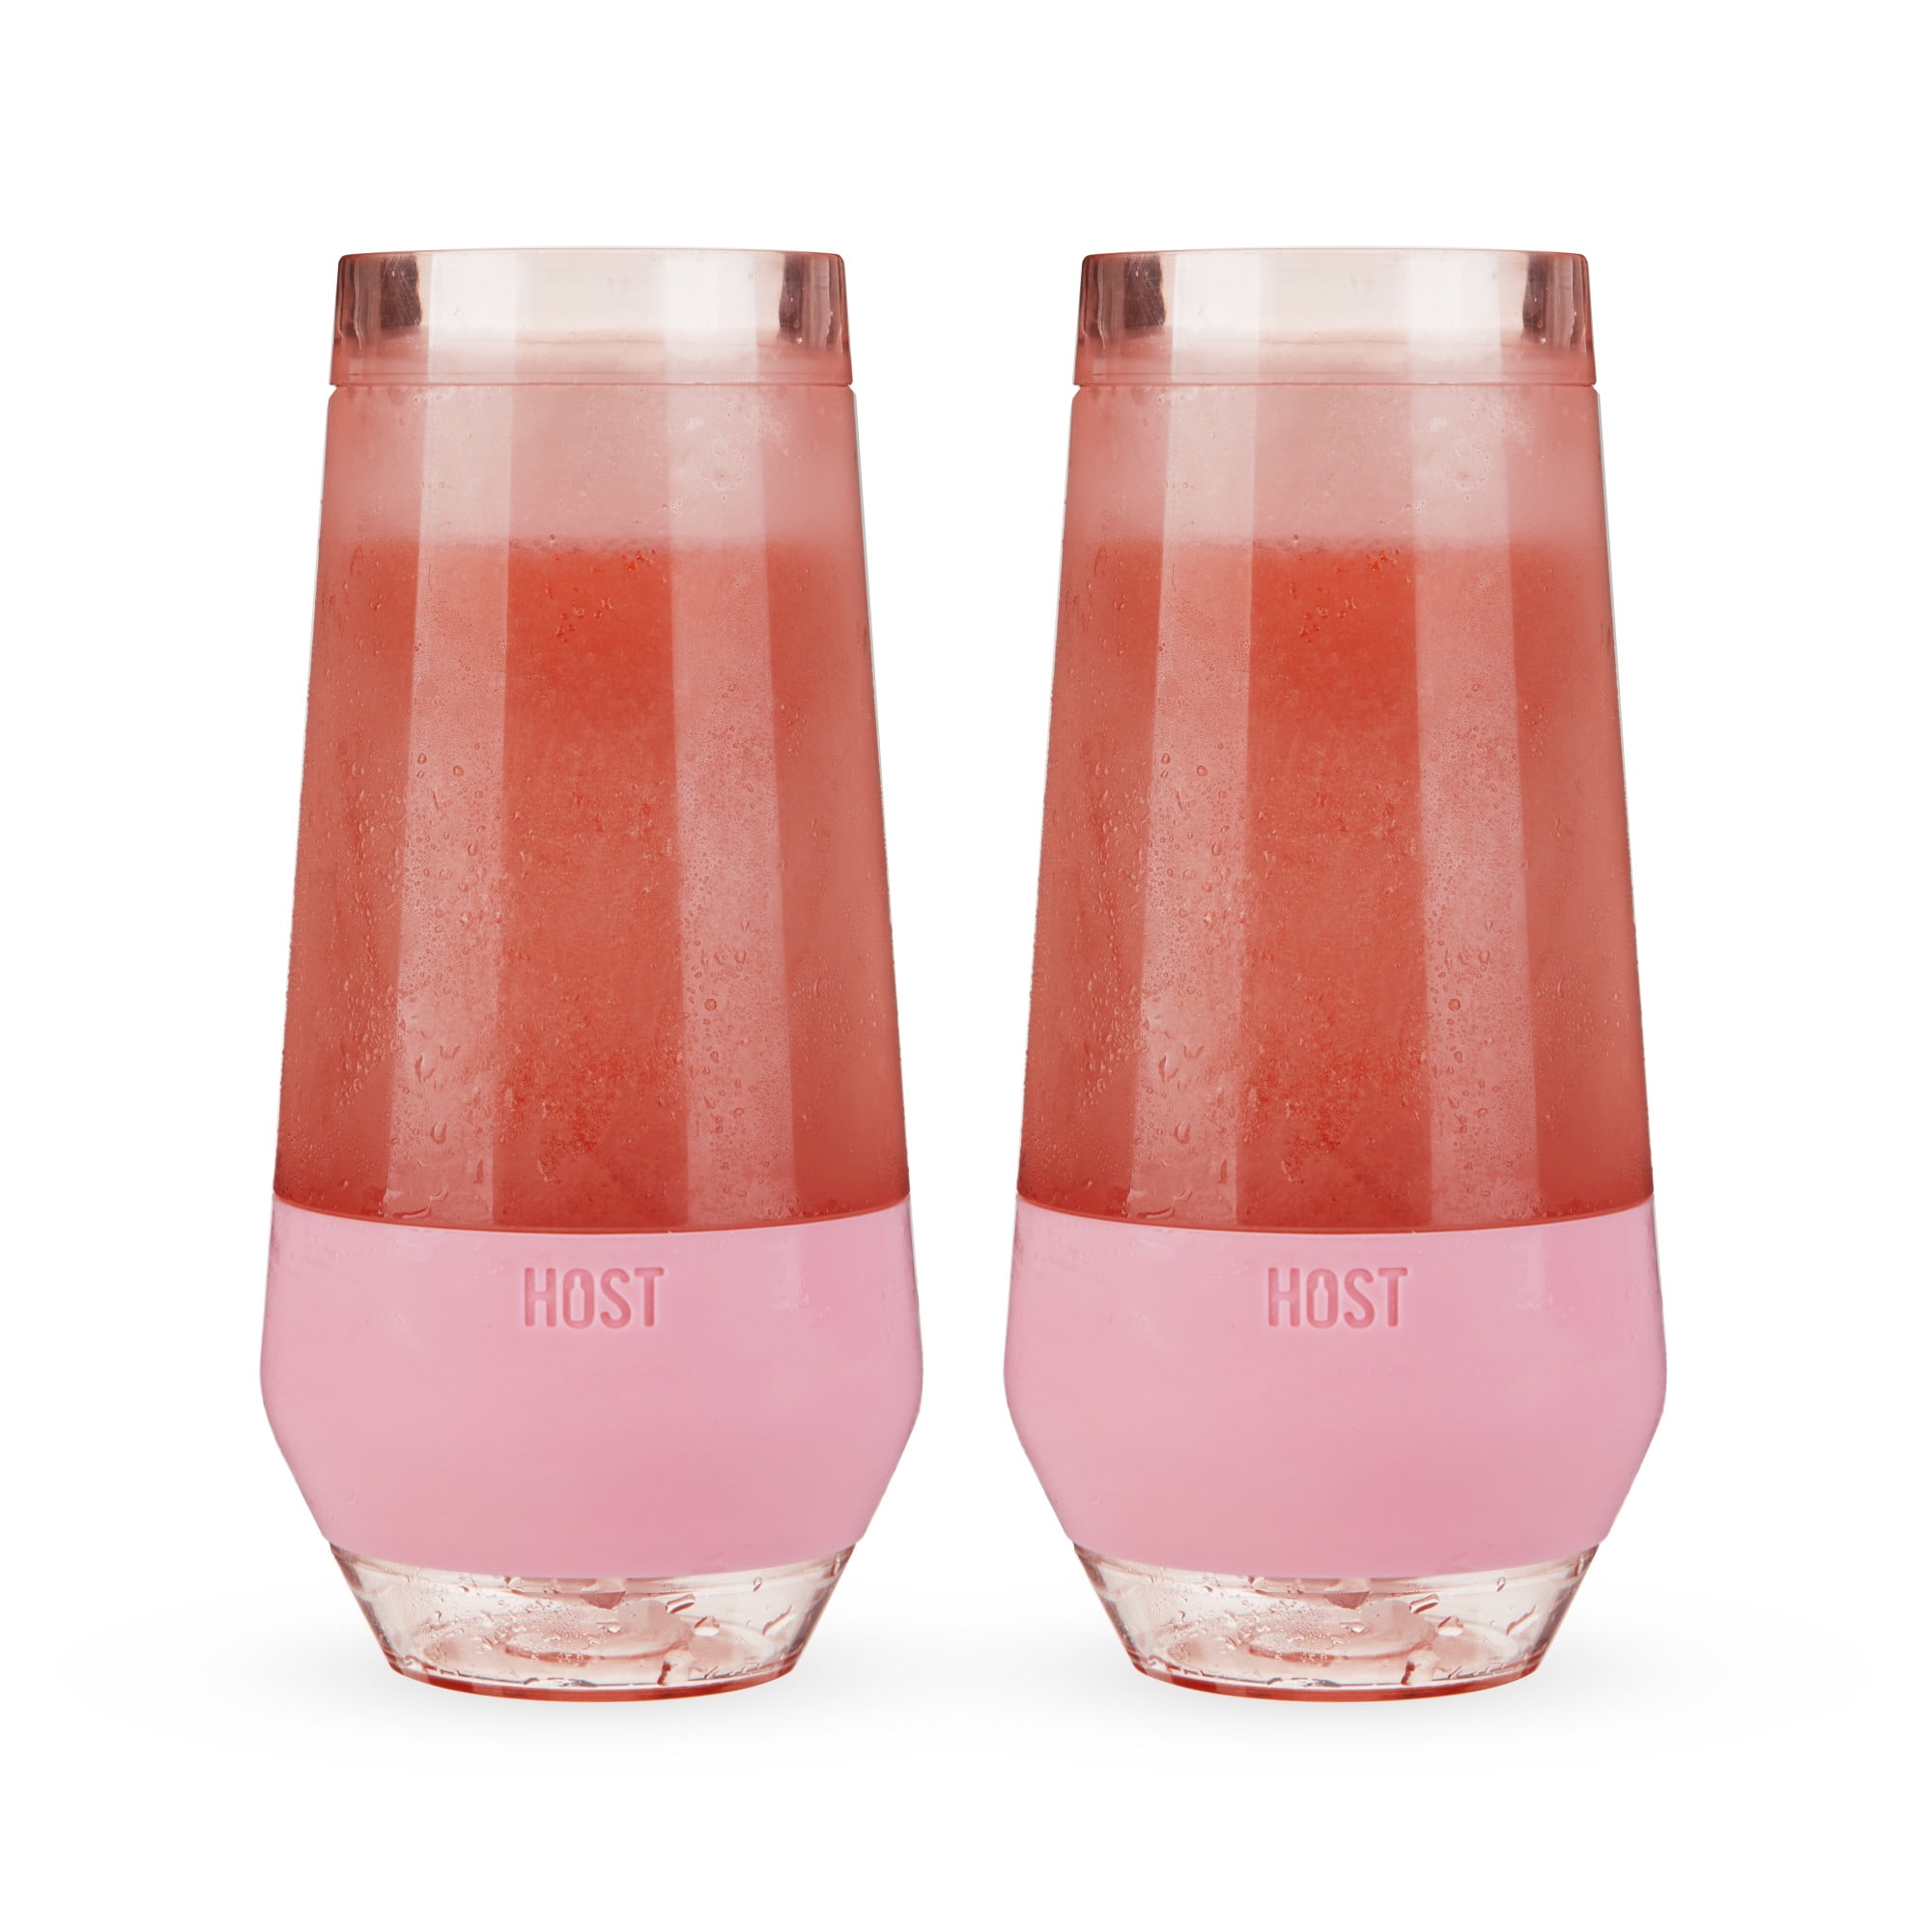 Pink Wine Freeze Cooling Cup — The Basketry